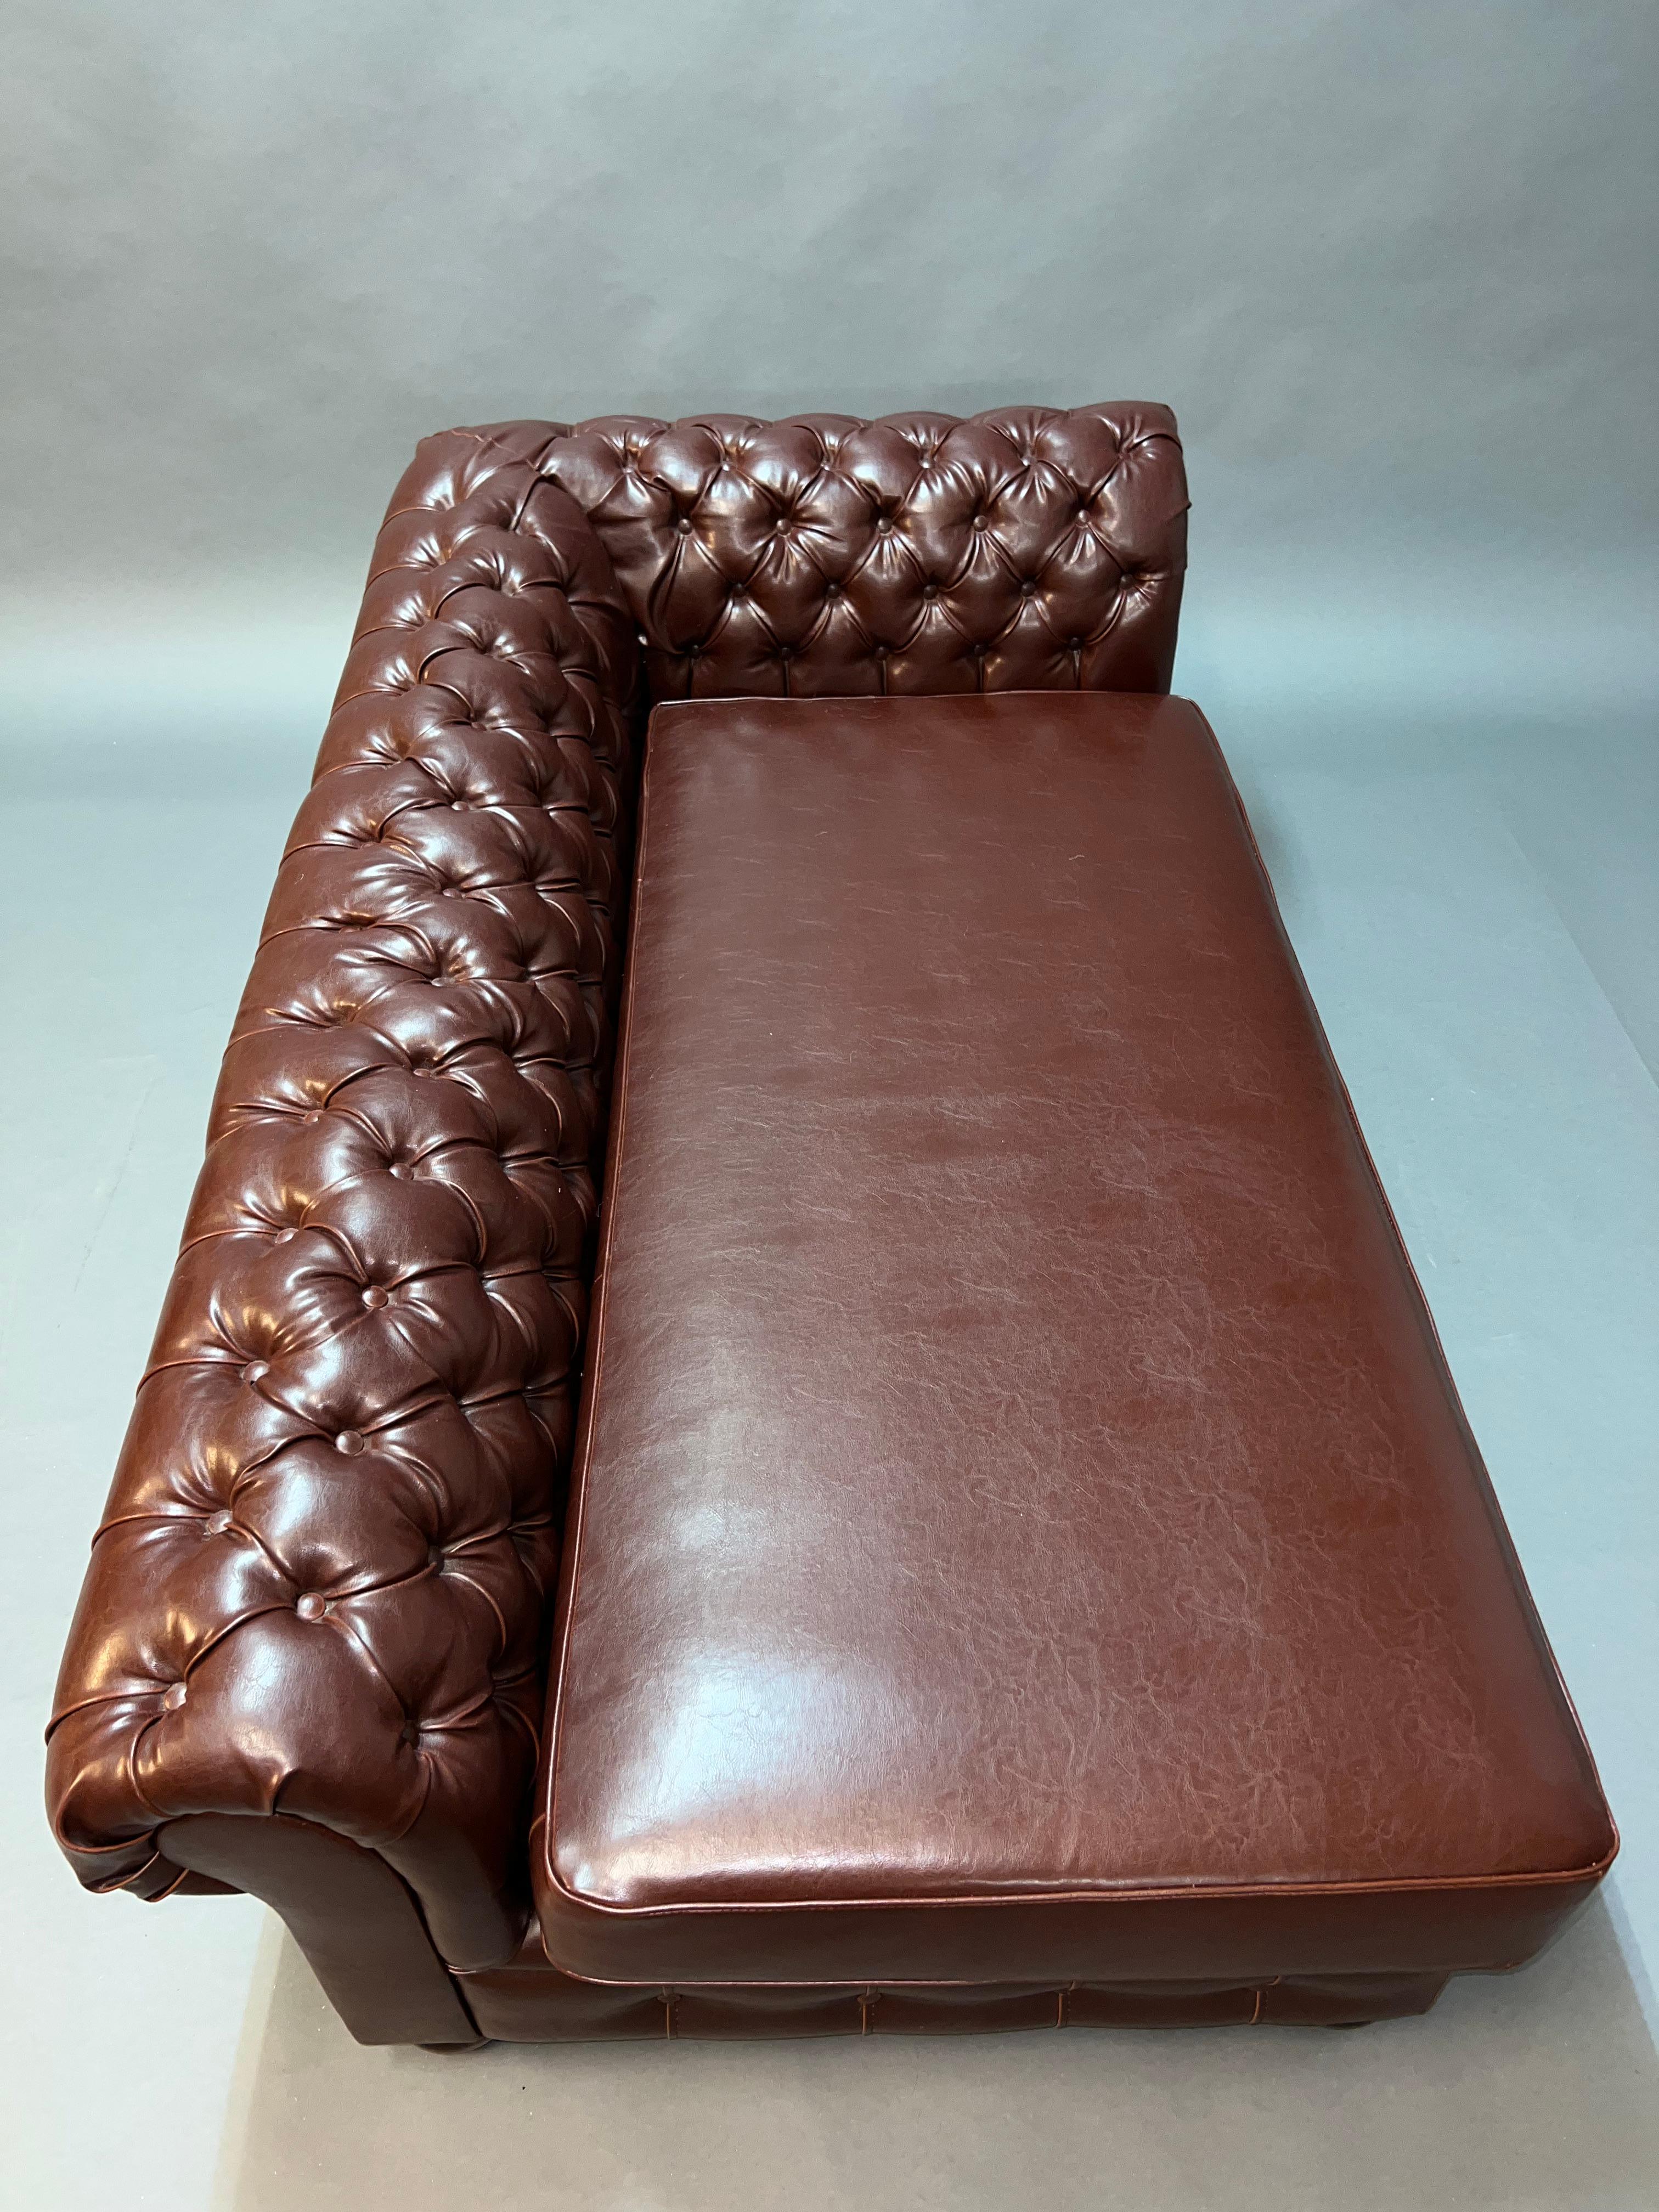 20th Century Lovely Vintage Chesterfield Brown Leather Look Chaise Lounge Daybed Sofa For Sale